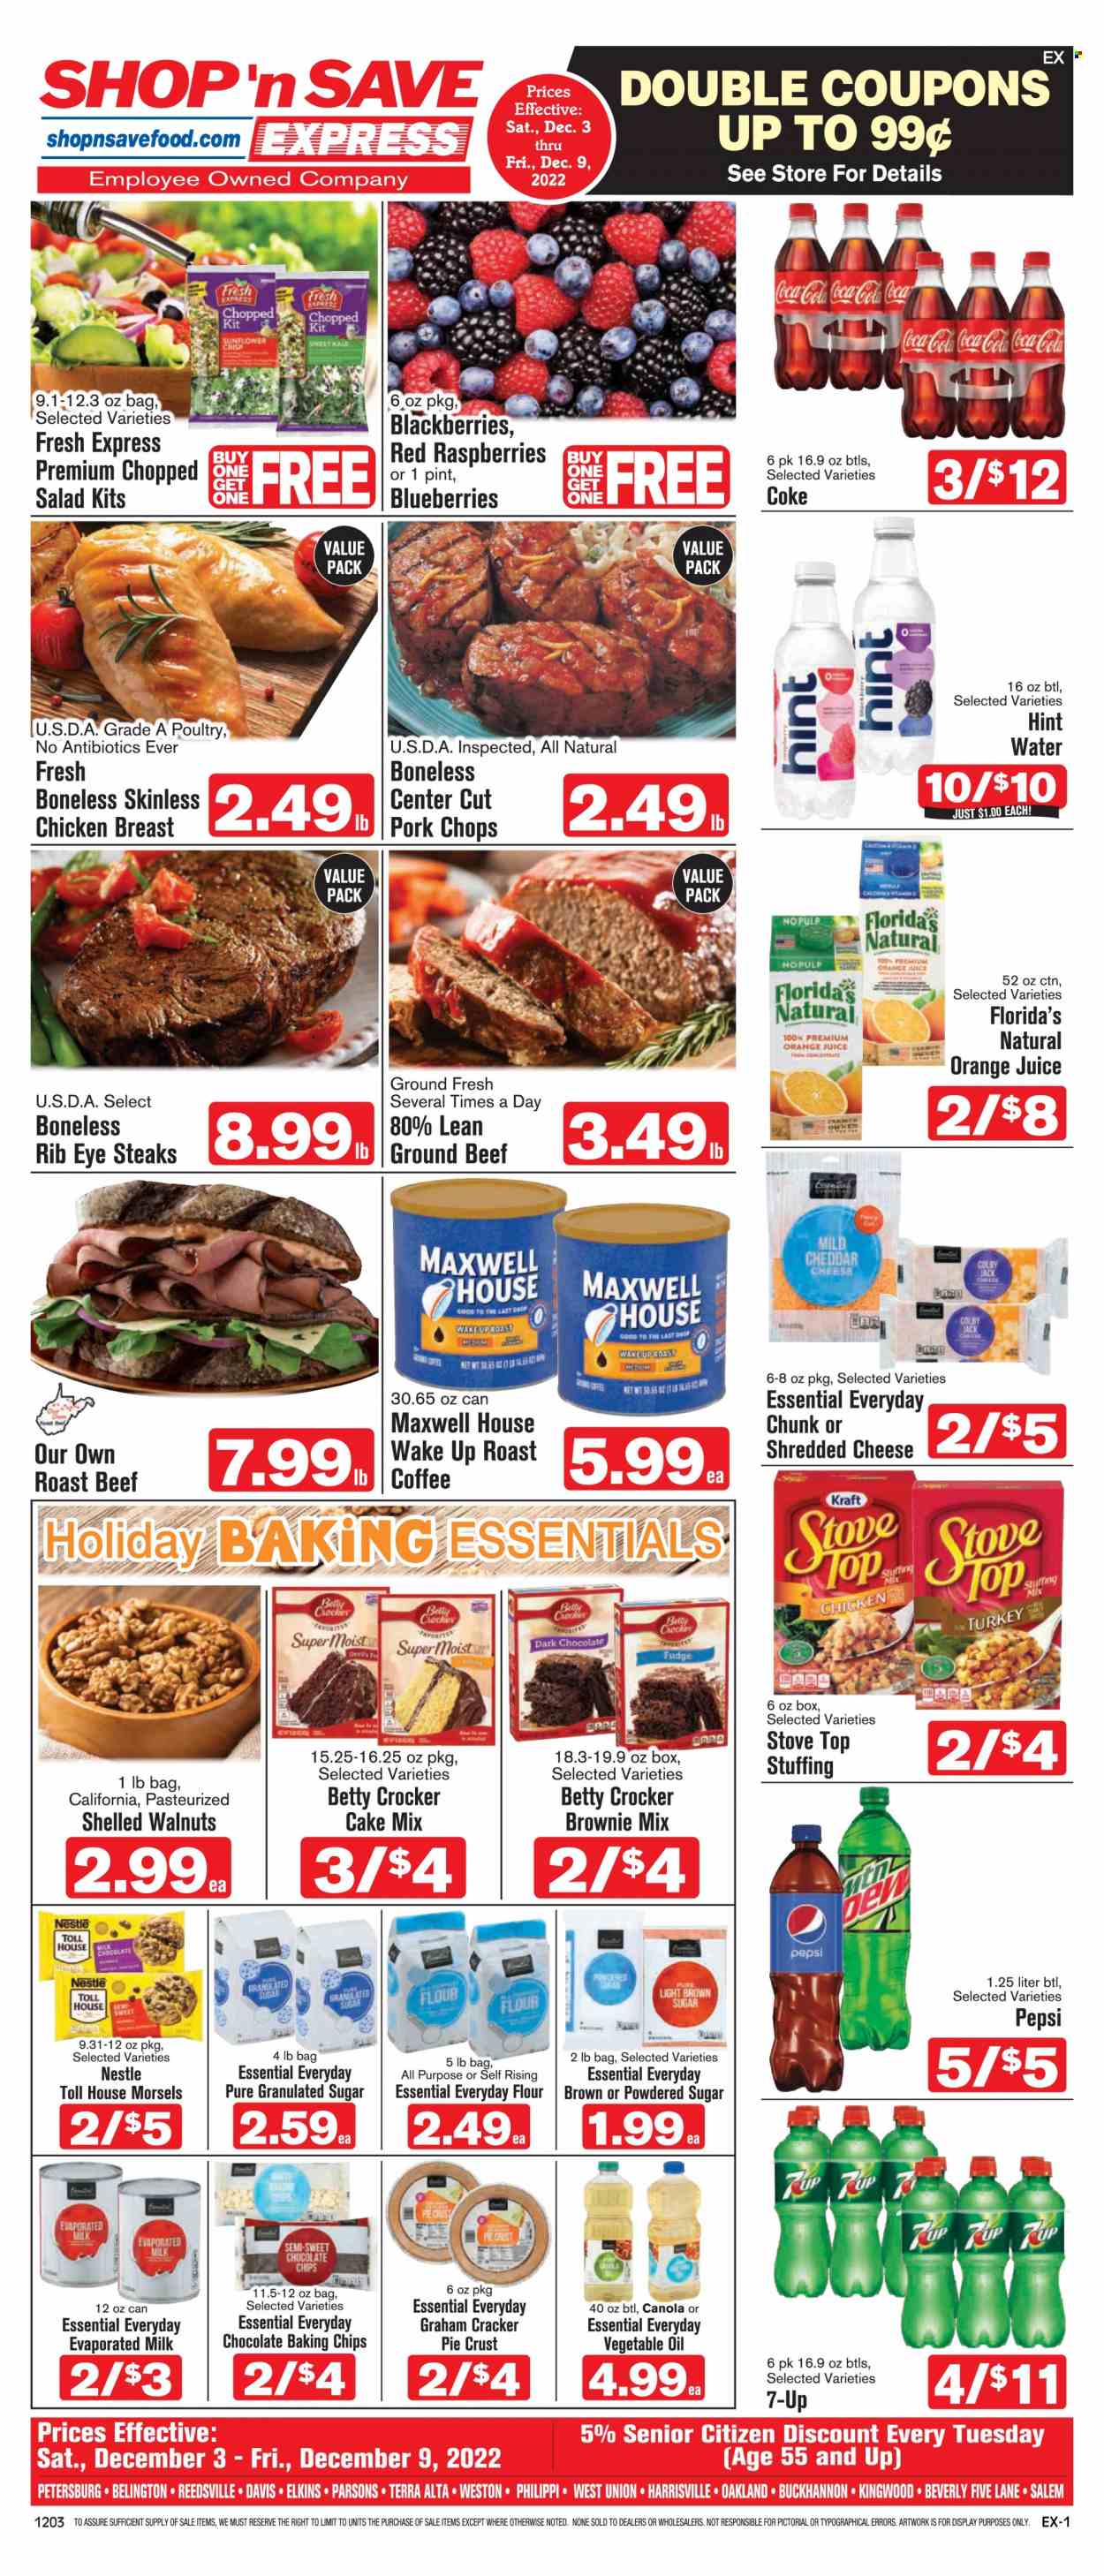 thumbnail - Shop ‘n Save Express Flyer - 12/03/2022 - 12/09/2022 - Sales products - brownie mix, cake mix, kale, salad, blackberries, beef meat, ground beef, steak, roast beef, pork chops, pork meat, Kraft®, Colby cheese, mild cheddar, shredded cheese, evaporated milk, fudge, milk chocolate, Nestlé, crackers, dark chocolate, Florida's Natural, cane sugar, flour, granulated sugar, stuffing mix, pie crust, icing sugar, baking chips, vegetable oil, oil, walnuts, Coca-Cola, Pepsi, orange juice, juice, 7UP, Bai, Maxwell House, coffee, ground coffee, calcium. Page 1.